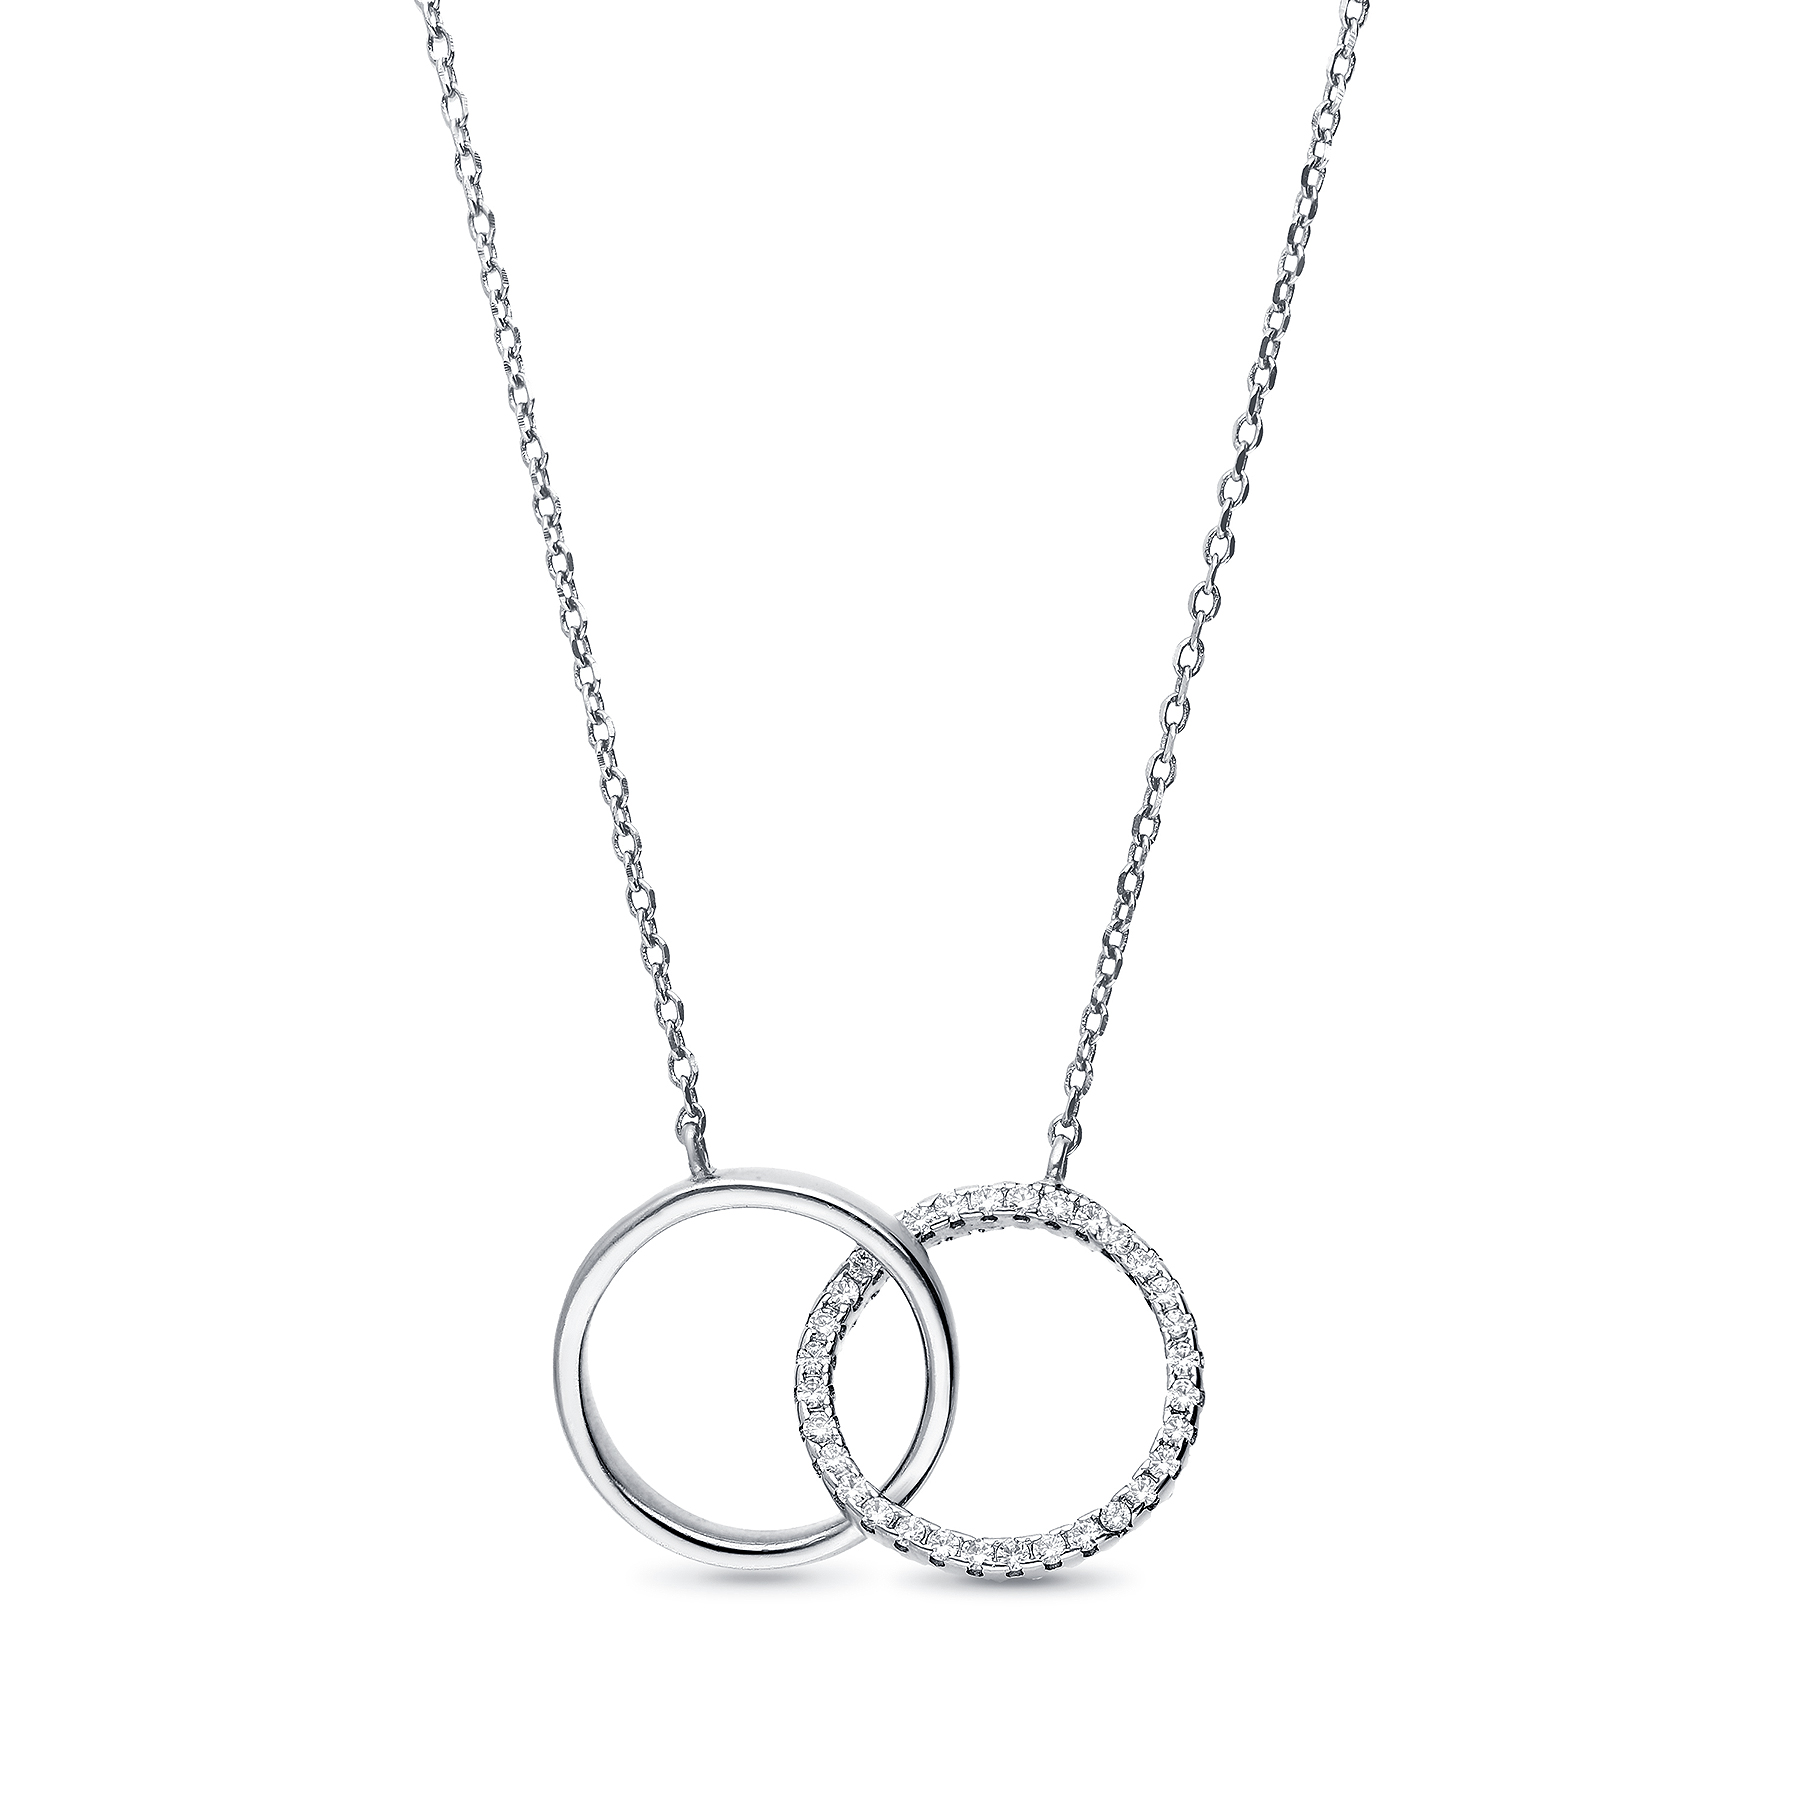 701-21569K - Wholesale 925 Sterling Silver Links Necklace Decorated With CZ